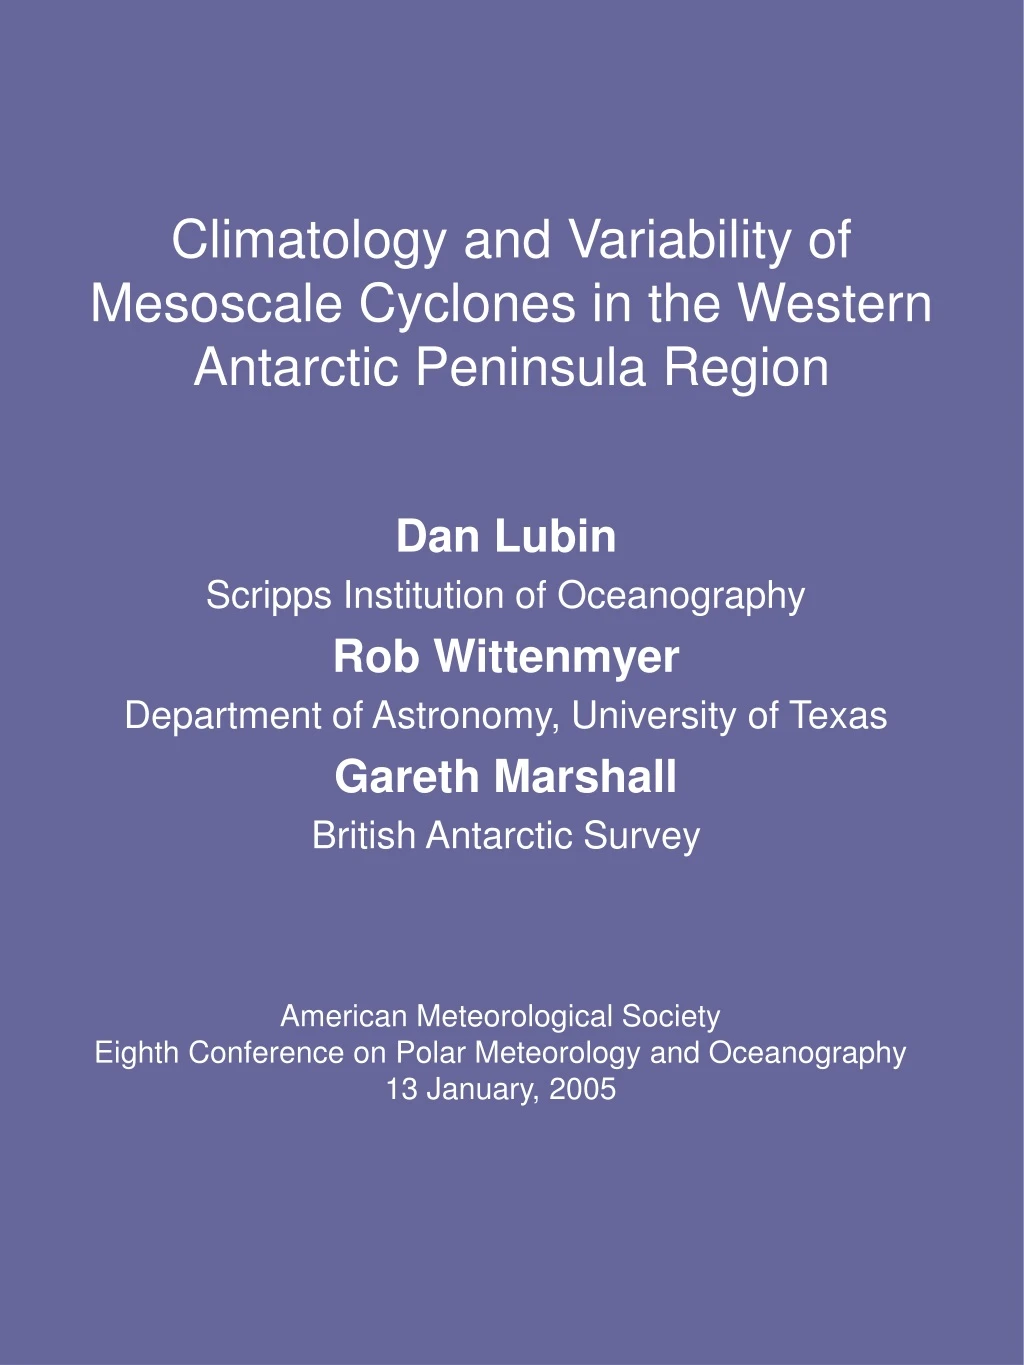 climatology and variability of mesoscale cyclones in the western antarctic peninsula region